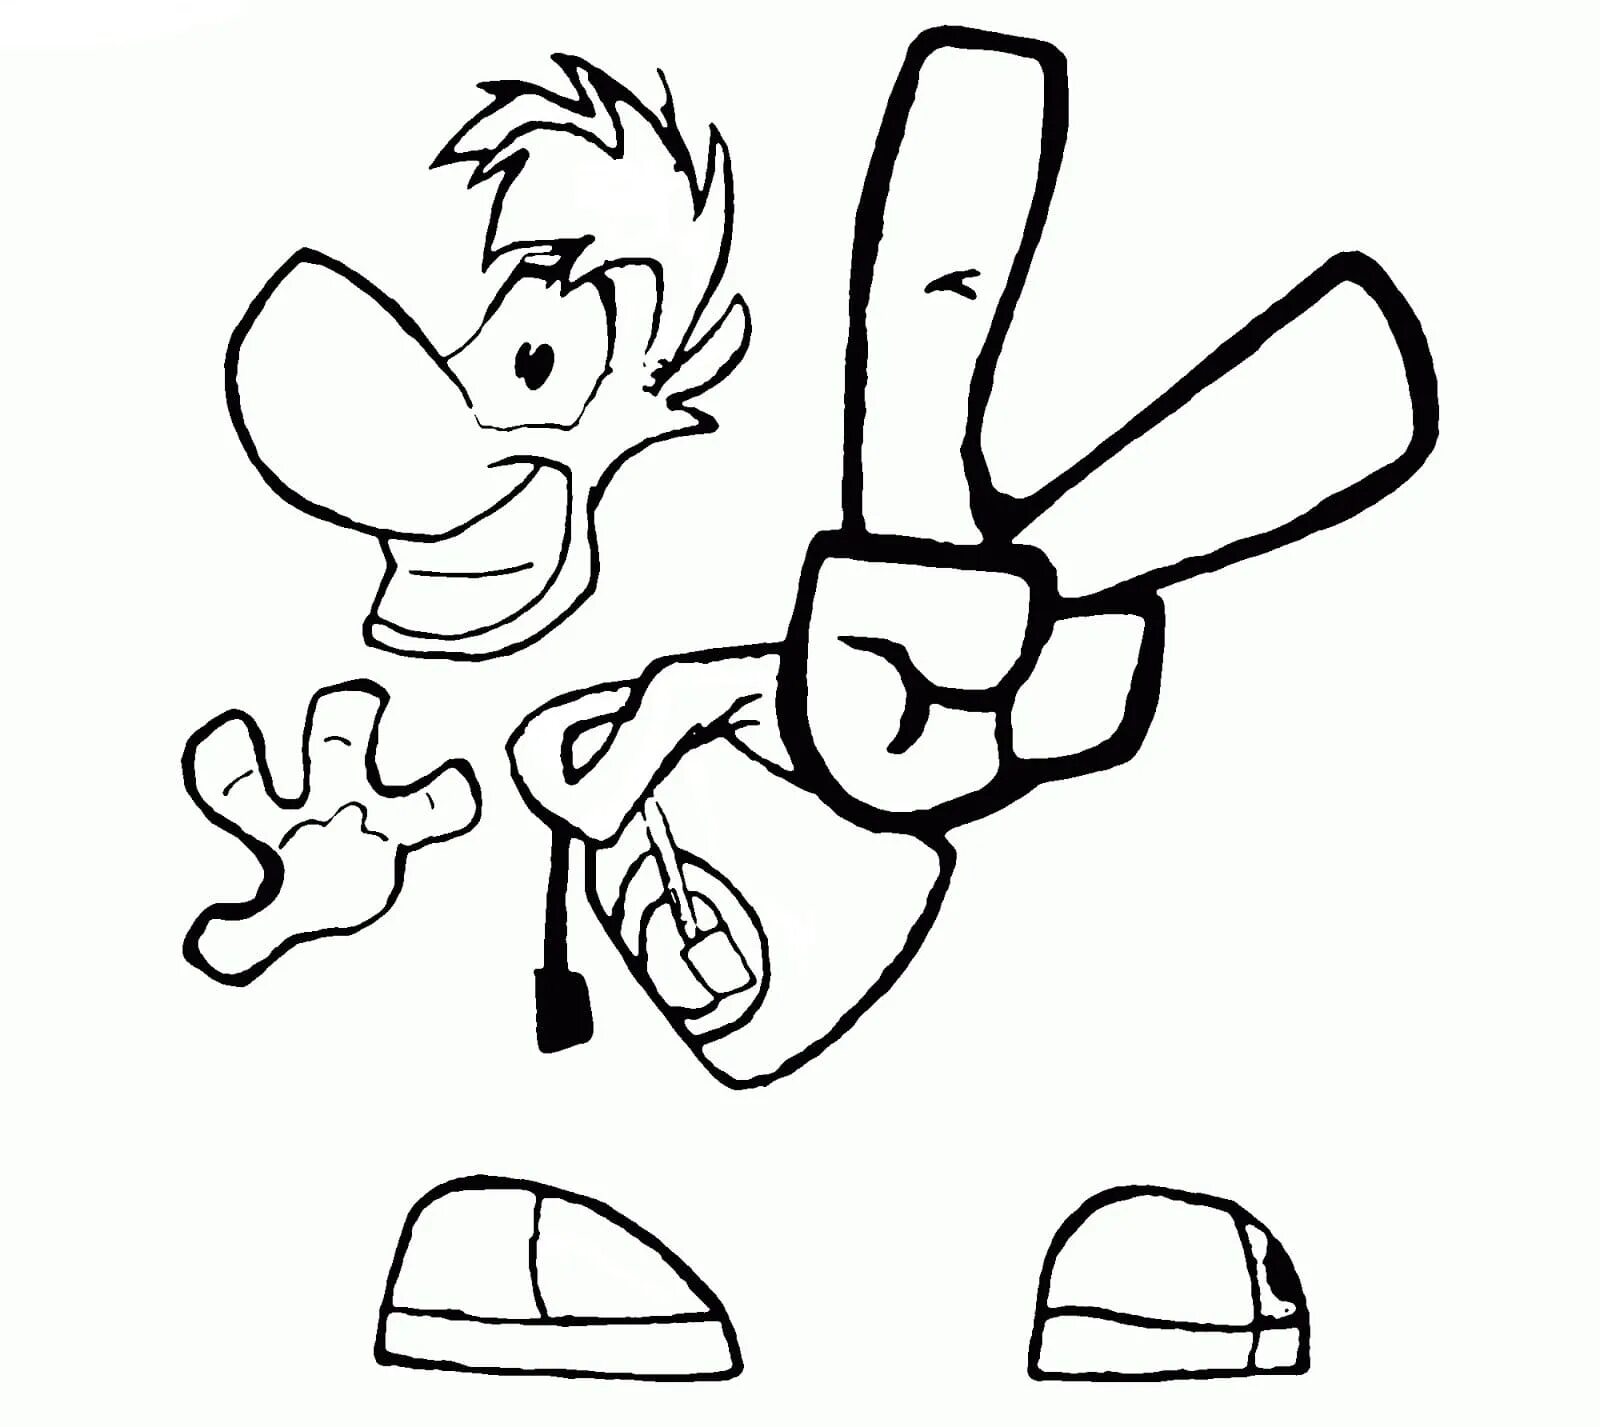 Animated rayman coloring page